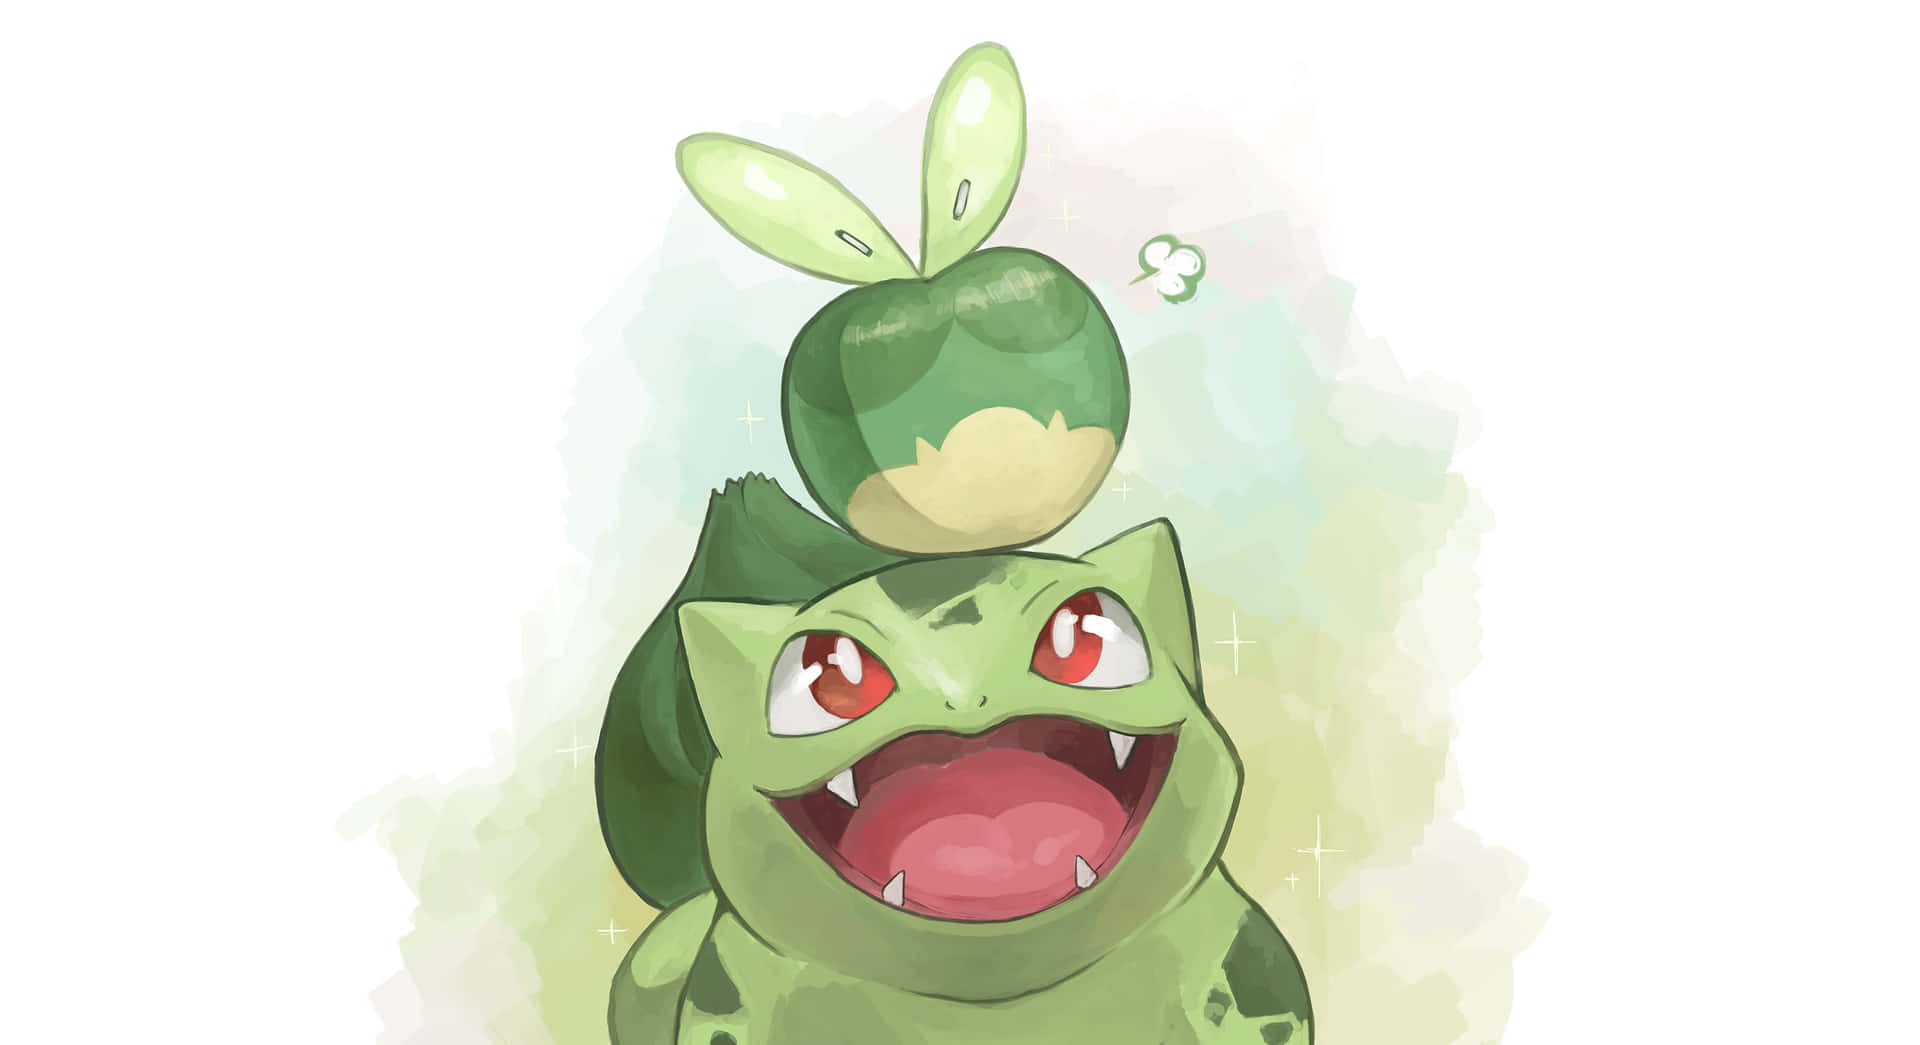 Fun With Colours - BLM — Canon Shinies for the Bulbasaur line?